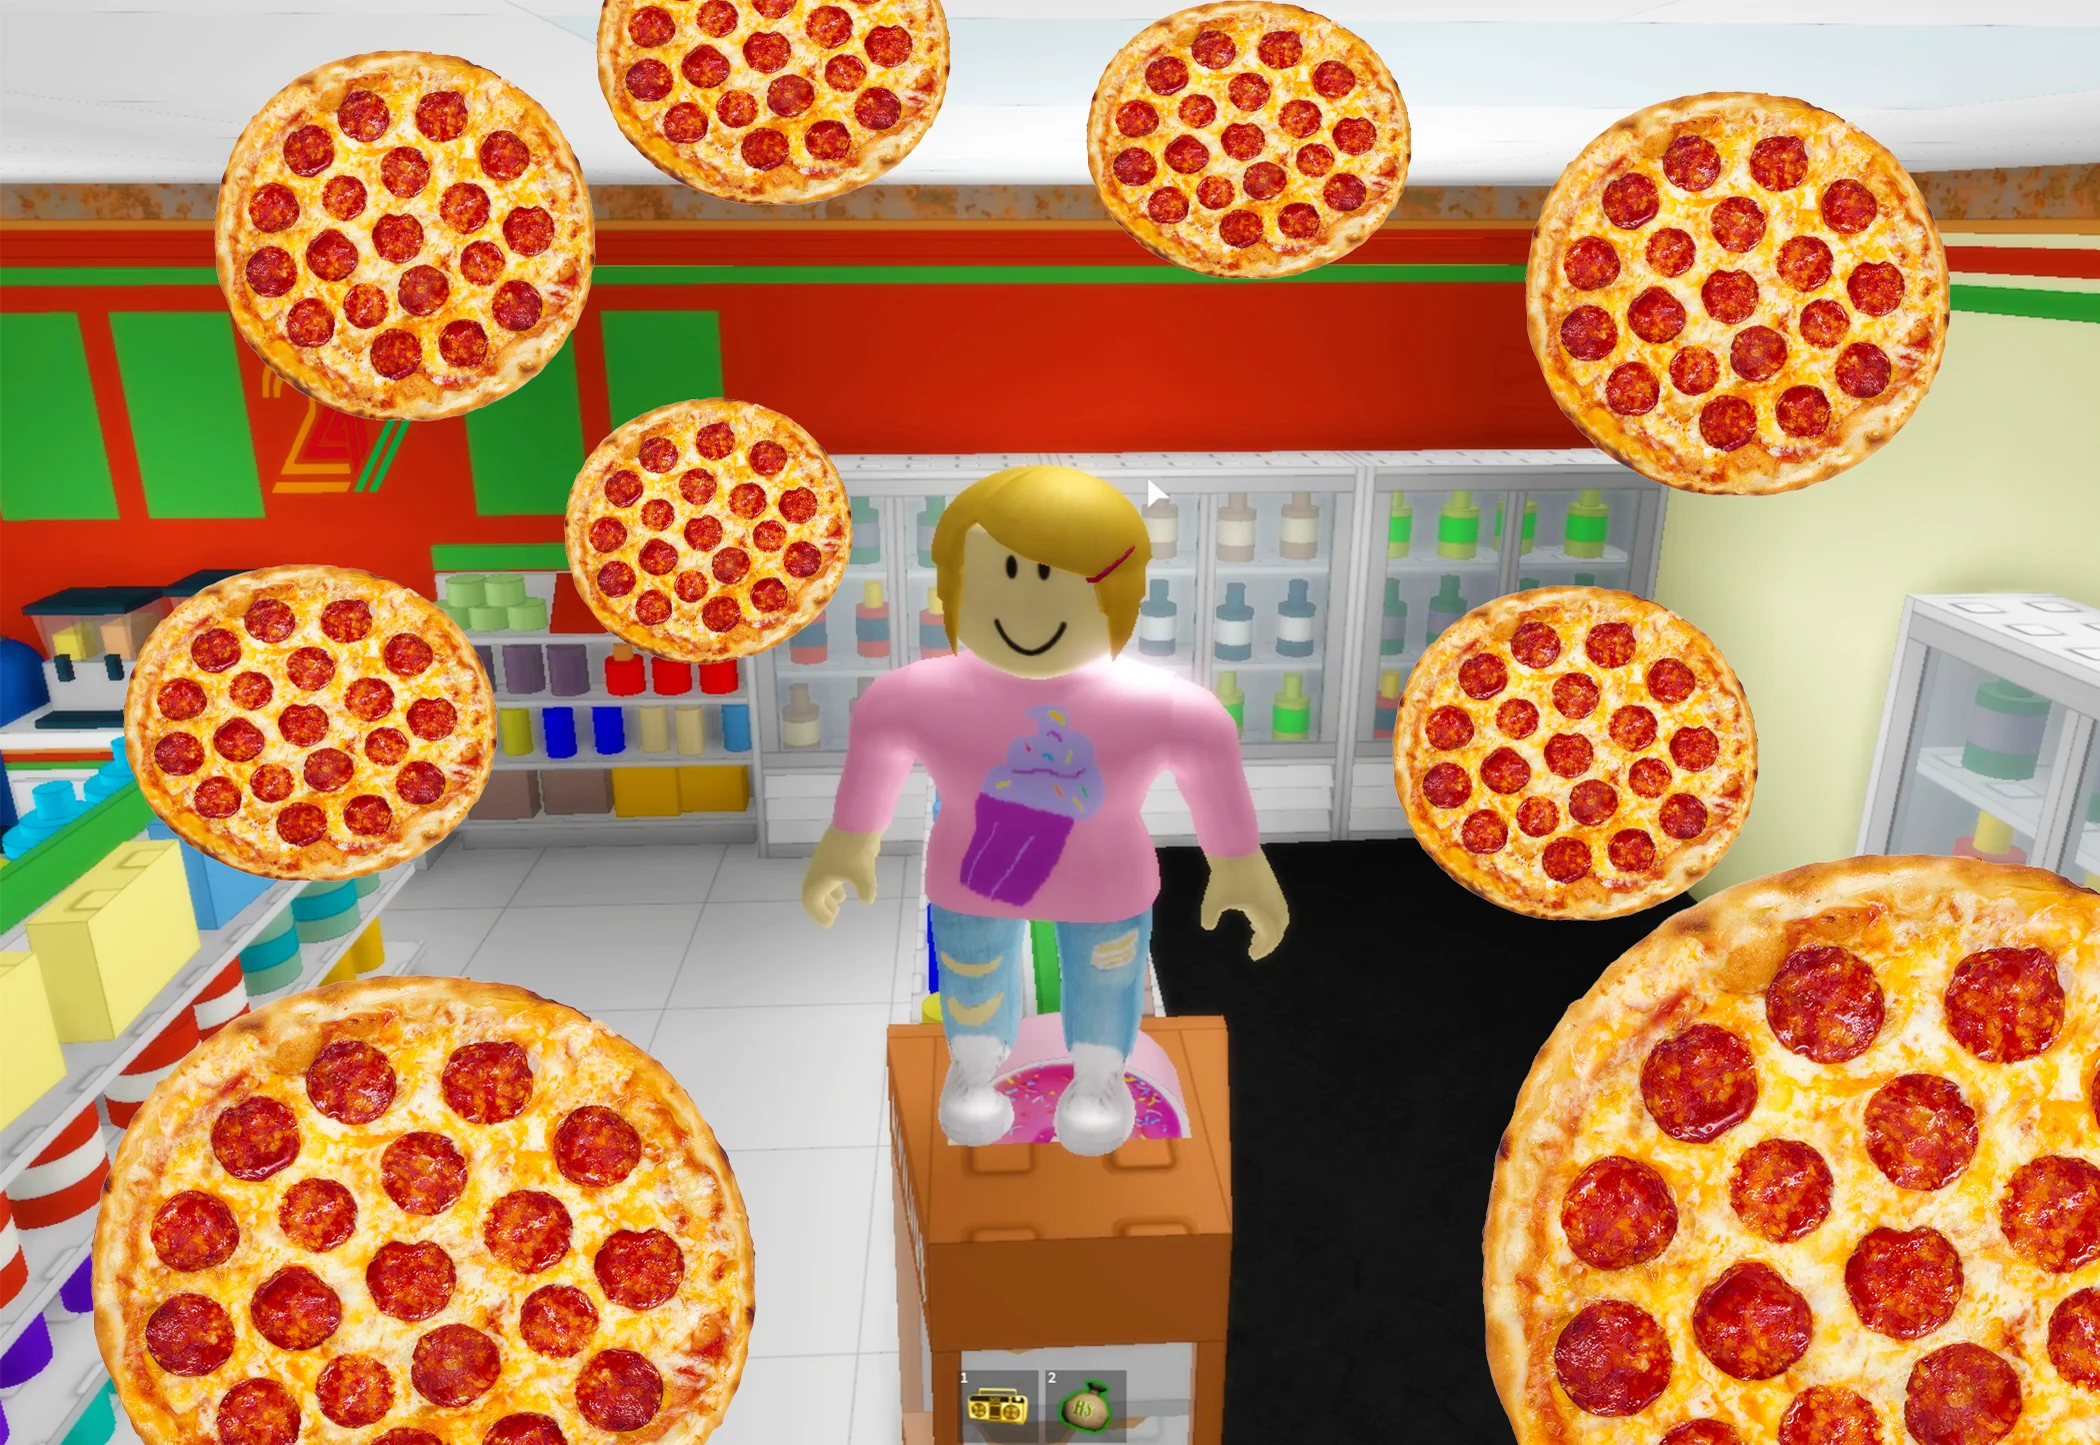 Roblox- Escape The Pizzeria! - The Toy Heroes on Vimeo